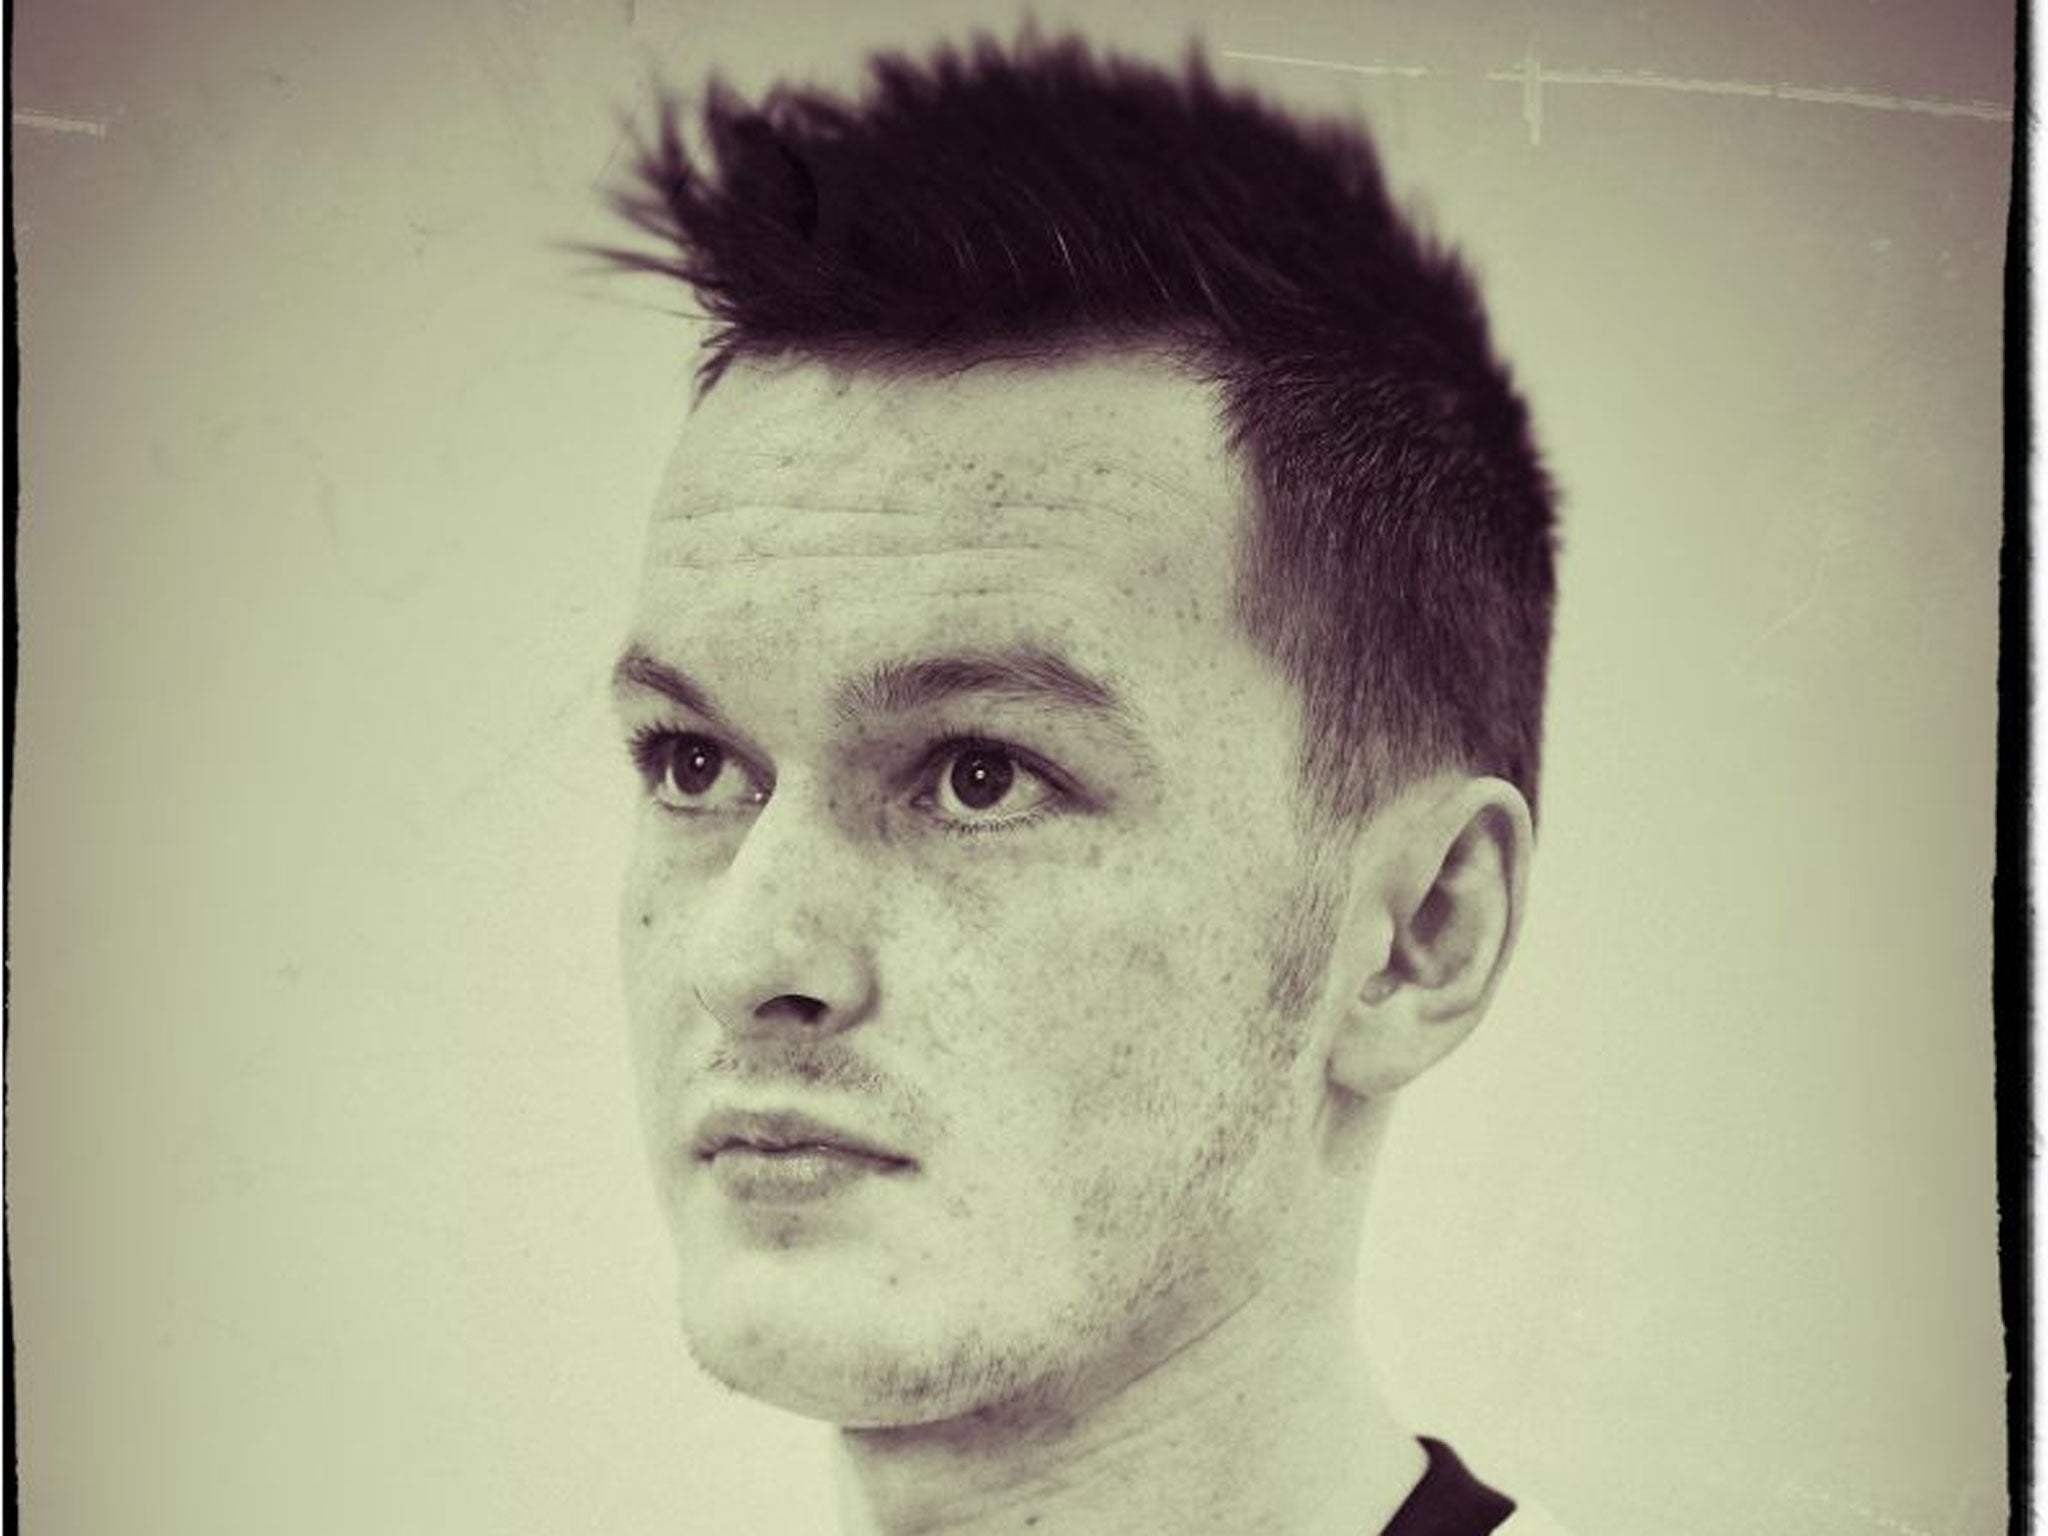 Lost generation: Chelsea’s Josh McEachran is waiting to go back out on loan, another Englishman in the wilderness